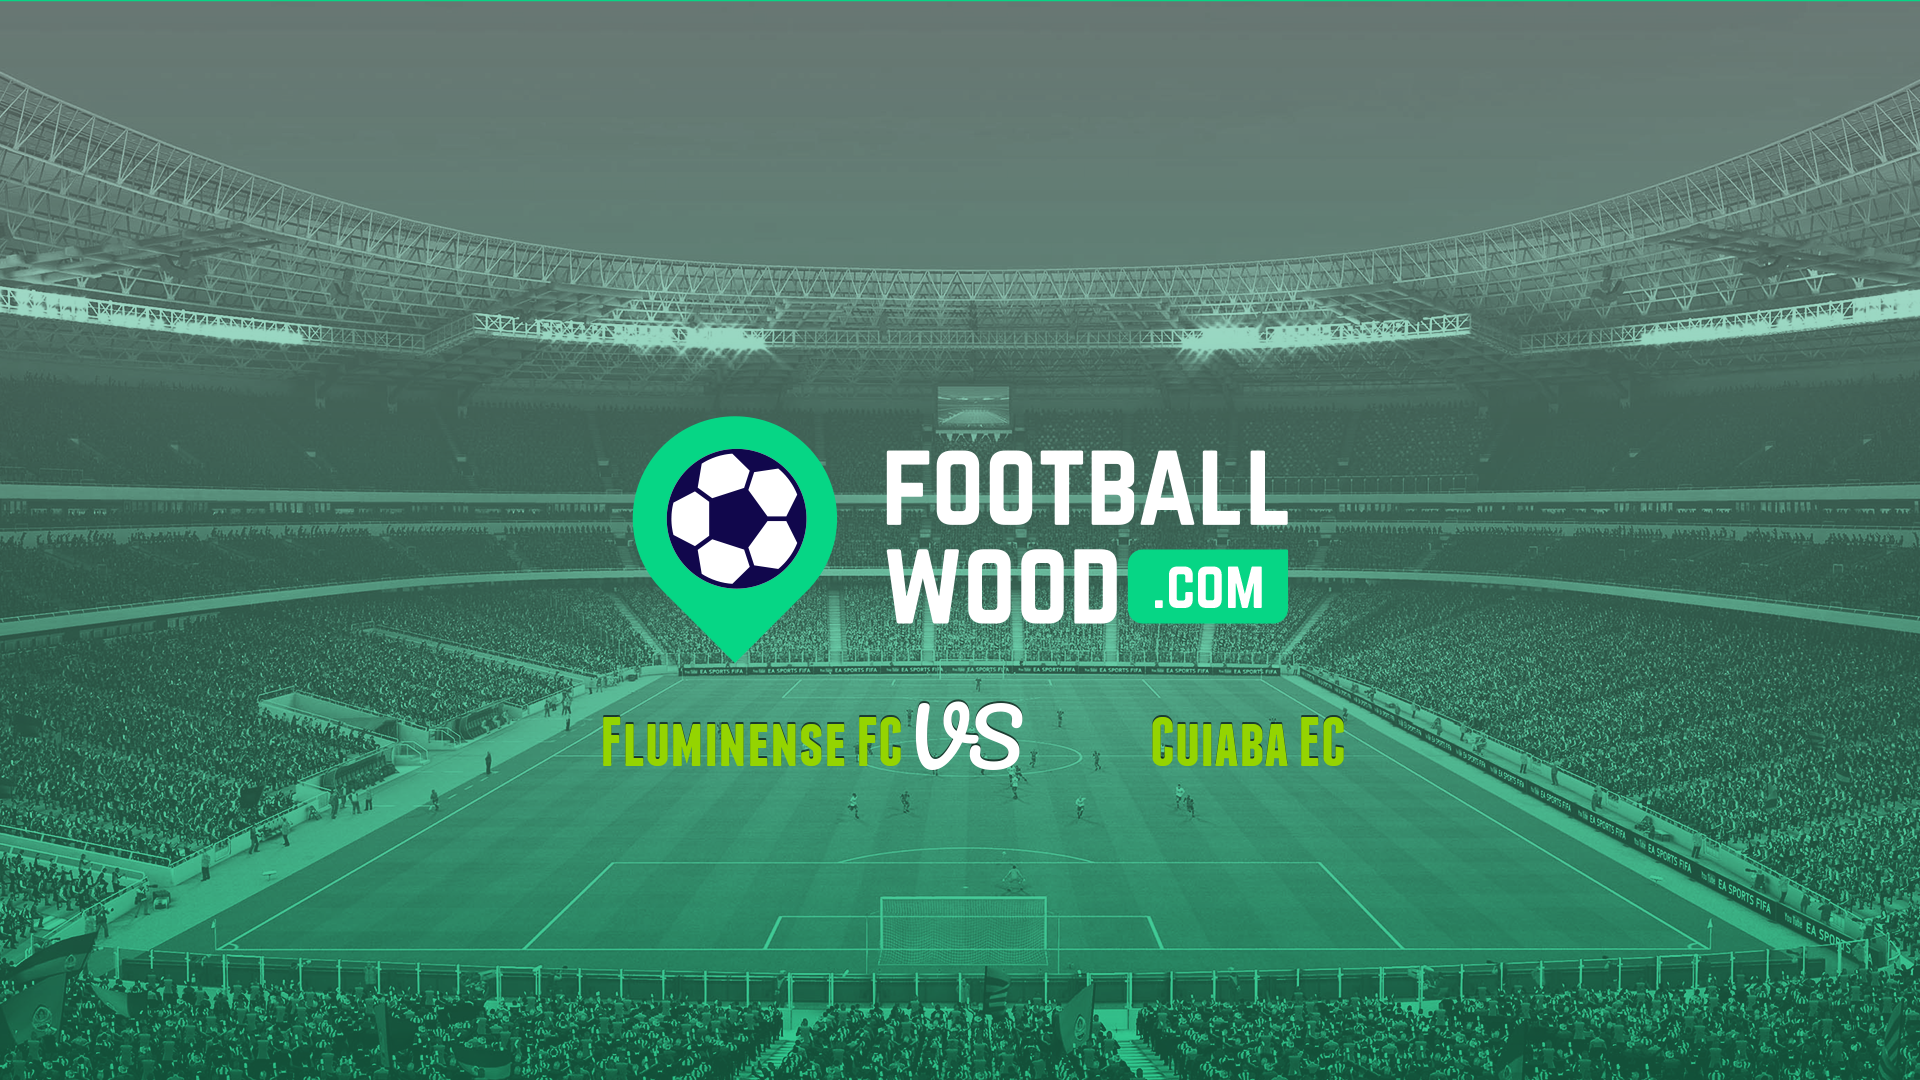 Match Preview Fluminense Fc Vs Cuiaba Ec Serie A 21 21 06 06 Confirmed Line Ups Live Score Head To Head Statistics And Latest Updates